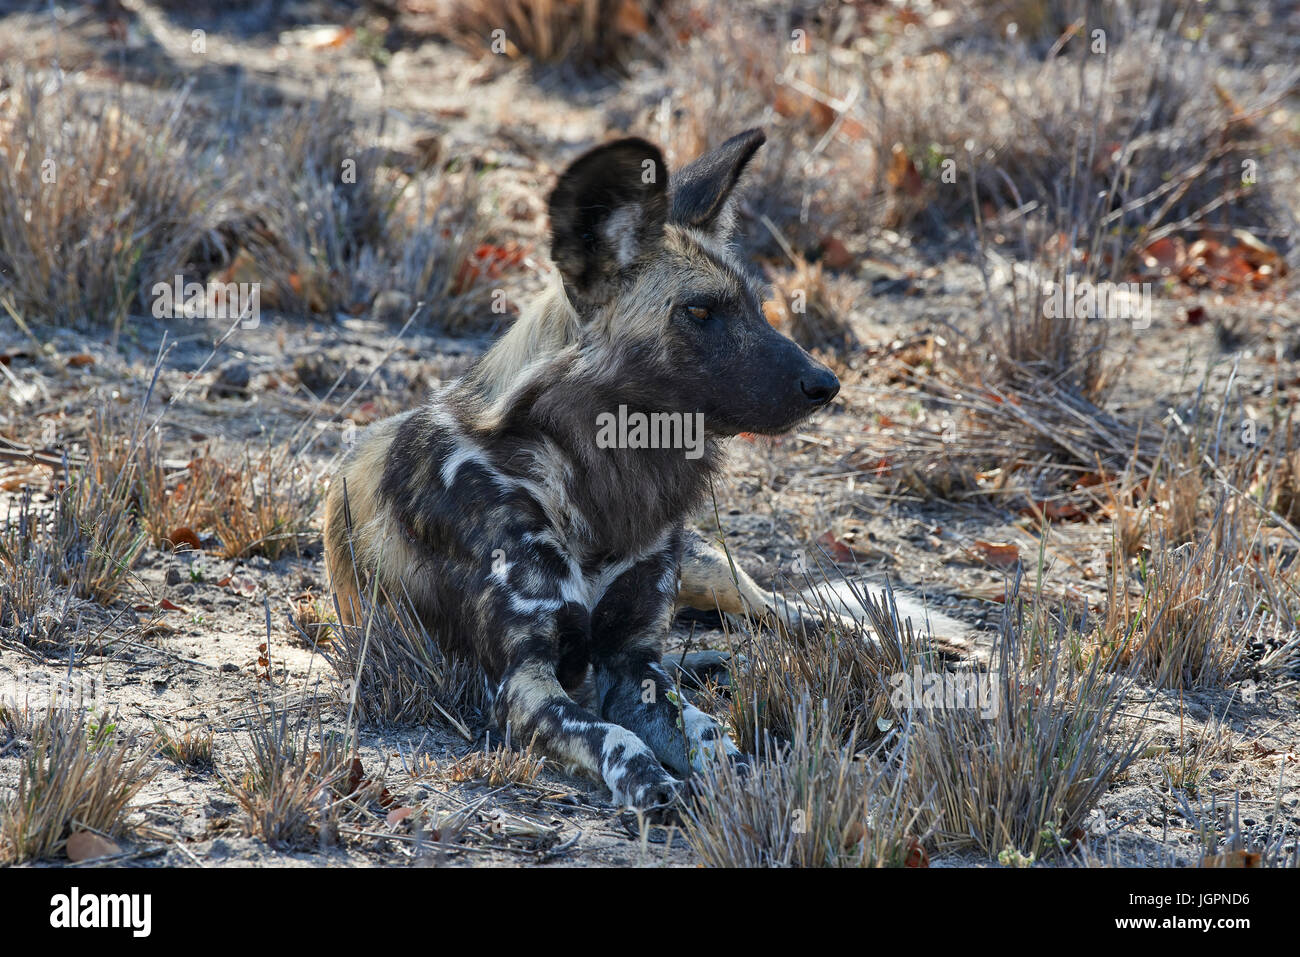 African Wild Dog, Lycoon pictus, lying down, Sabi Sands game reserve, South Africa Stock Photo